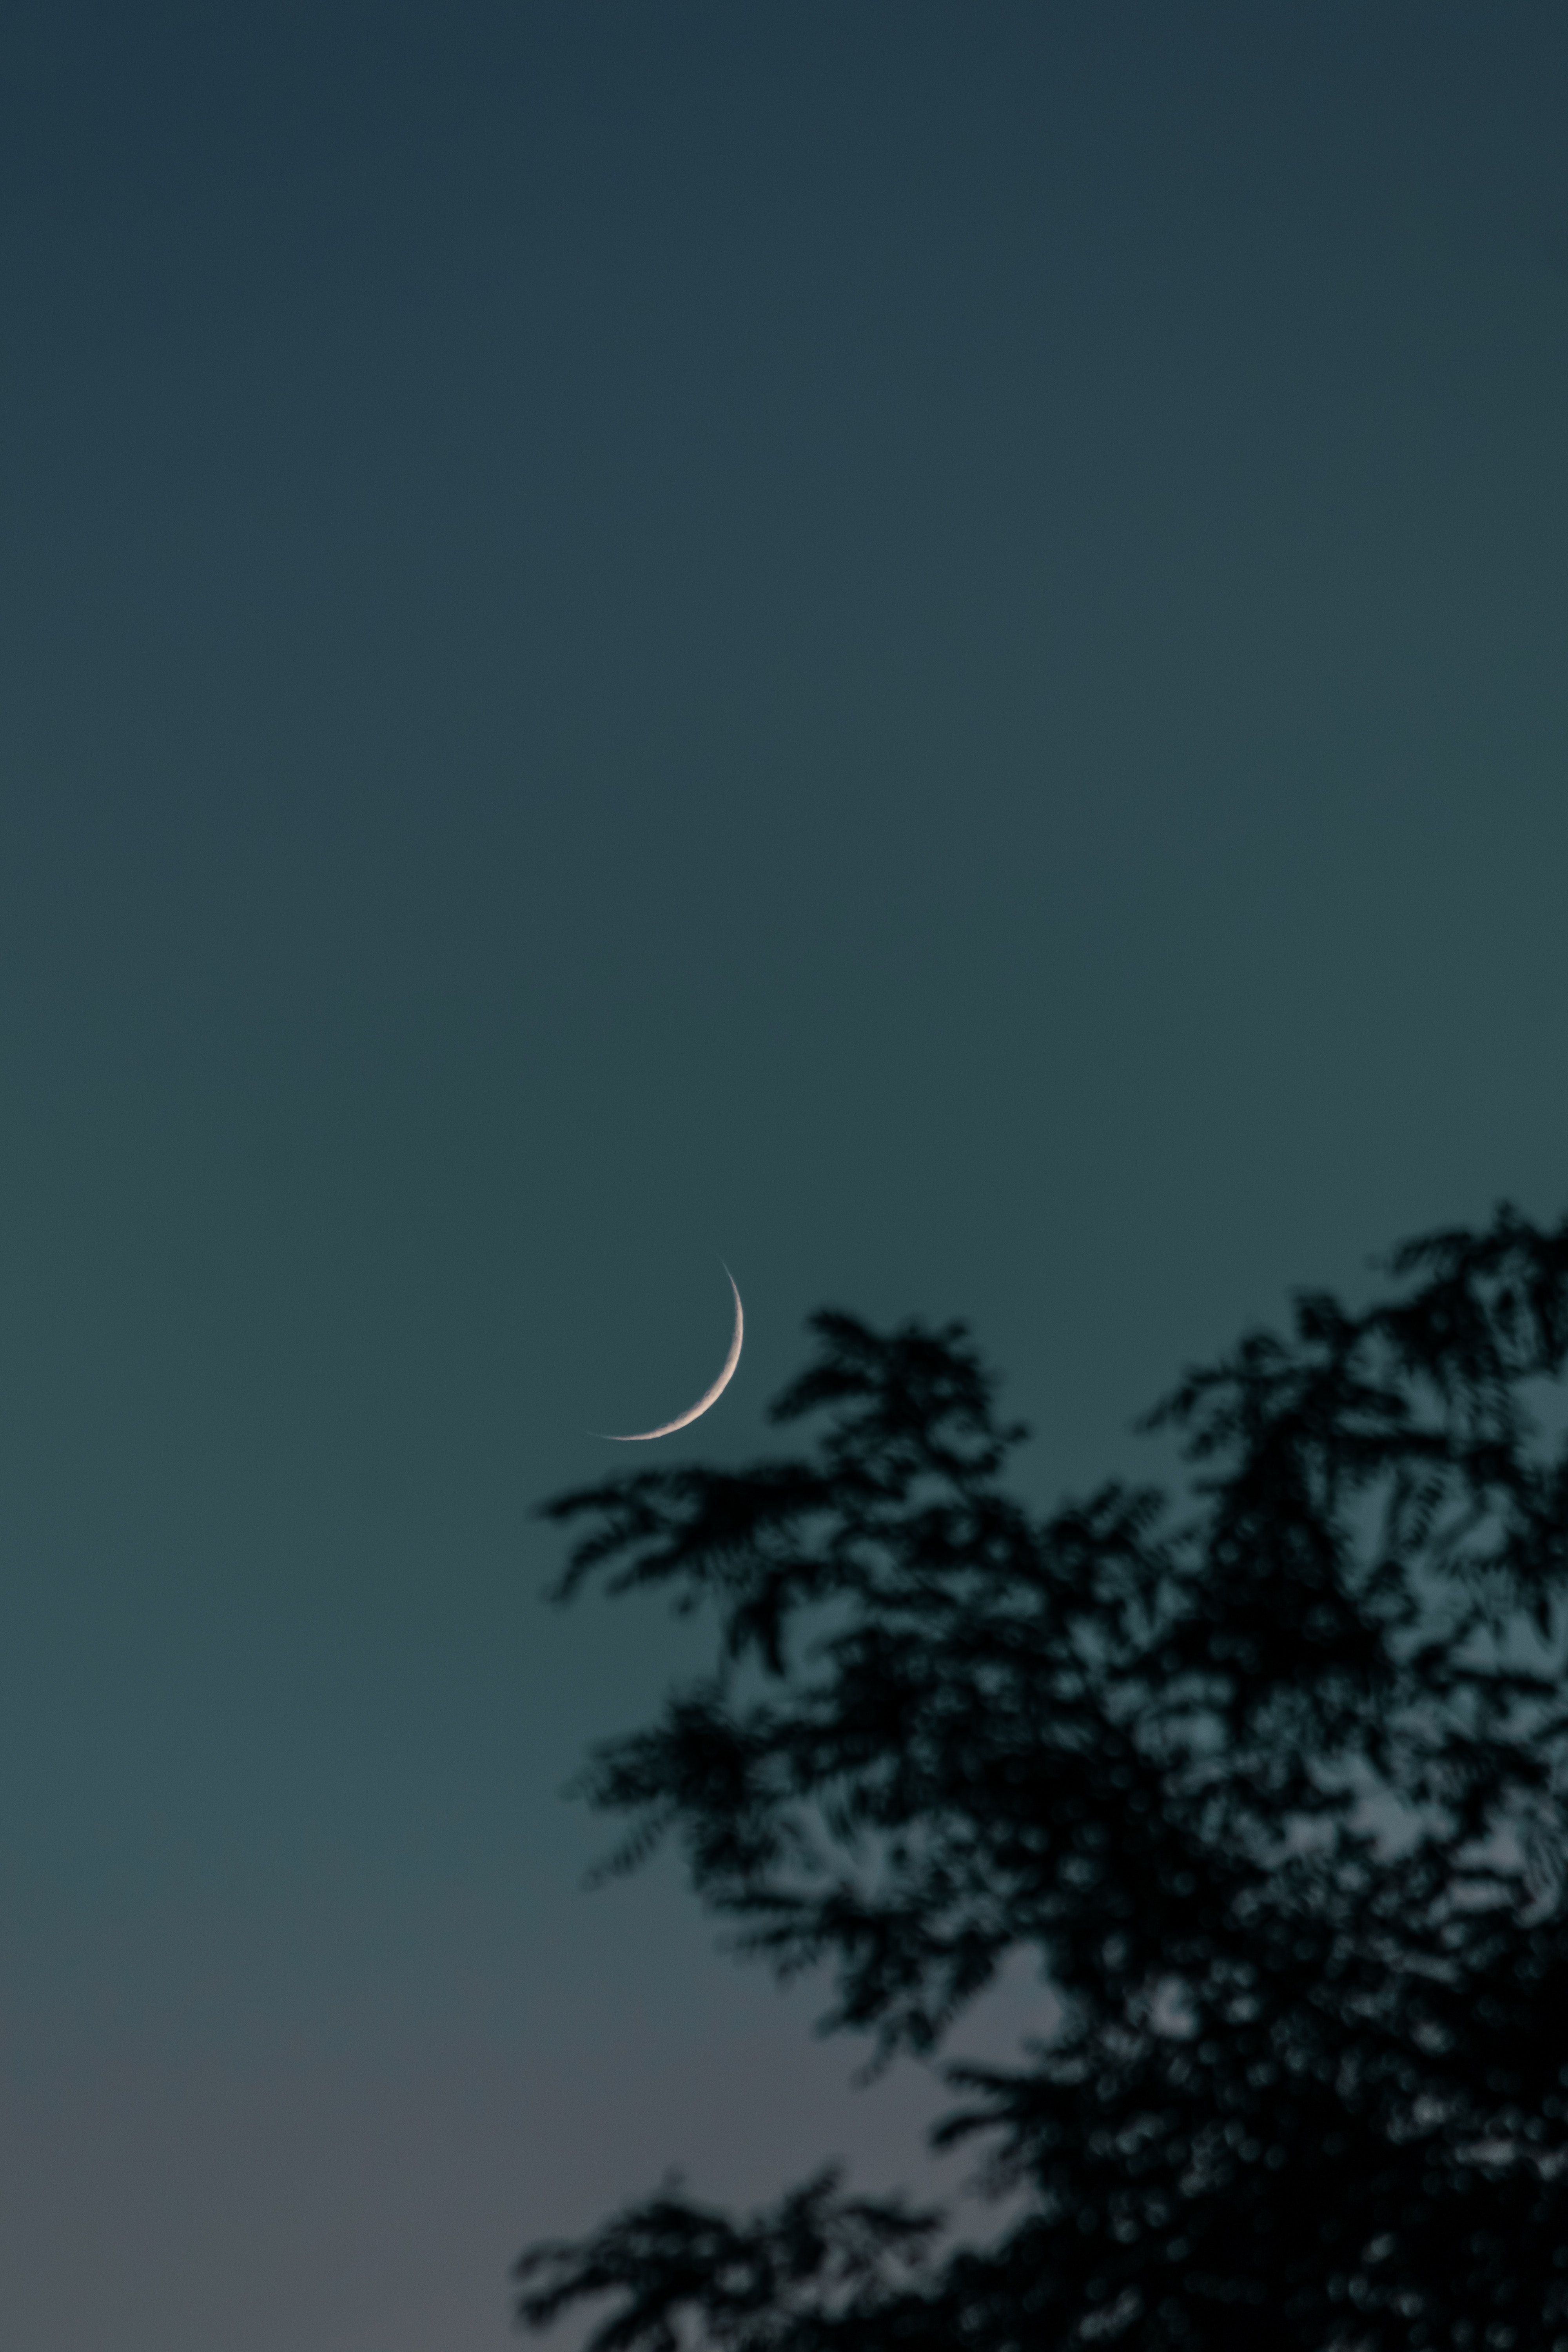 A crescent moon in a dark blue sky, with a tree in the foreground. - Eclipse